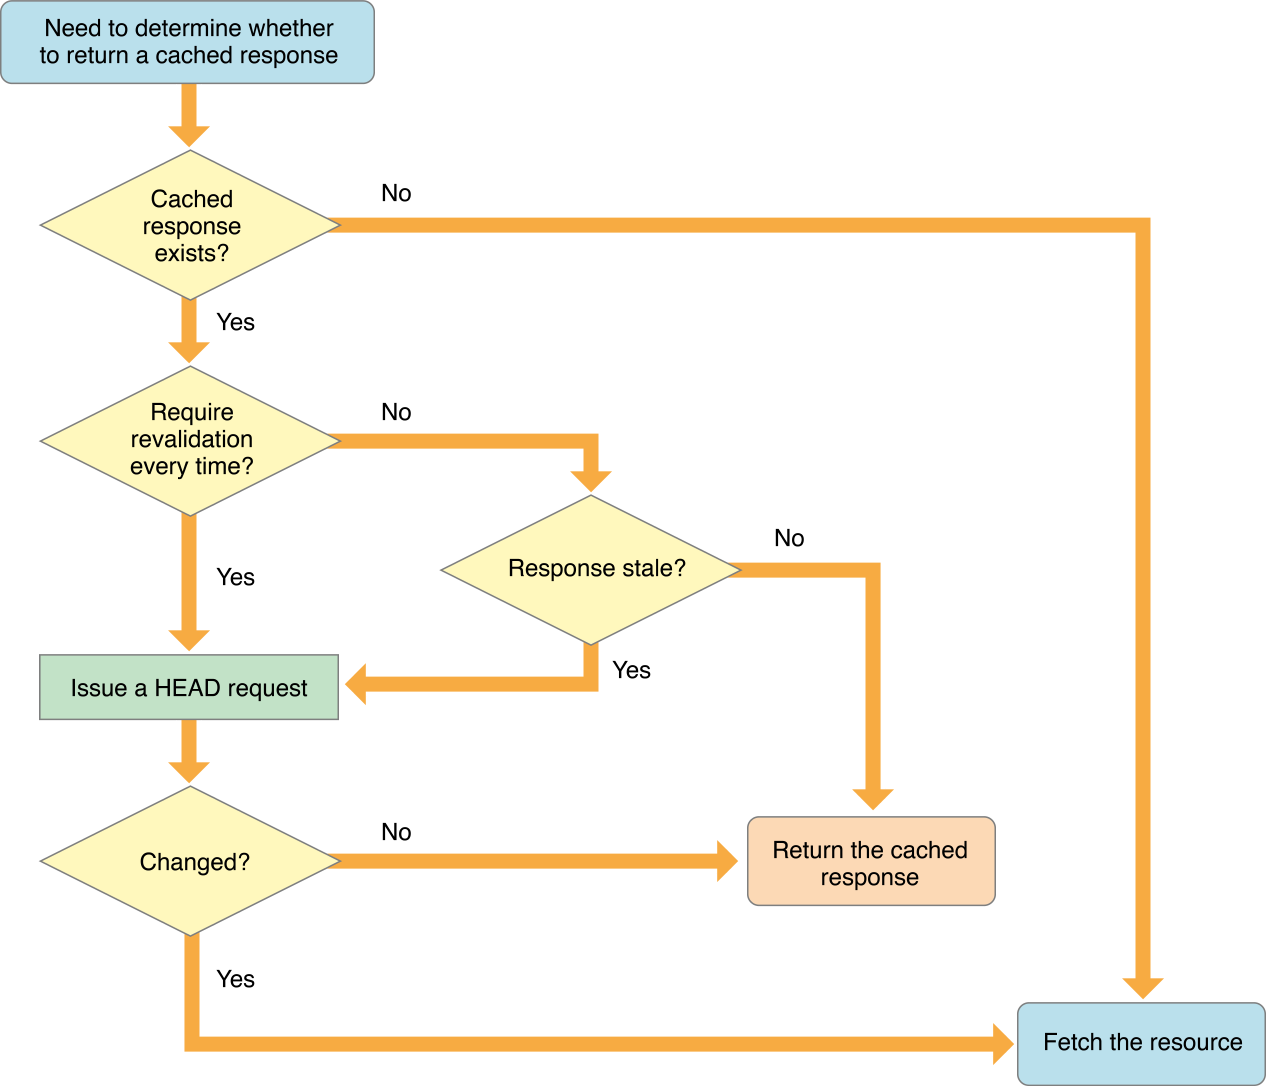 NSURLRequestUseProtocolCachePolicy decision tree for HTTP and HTTPS